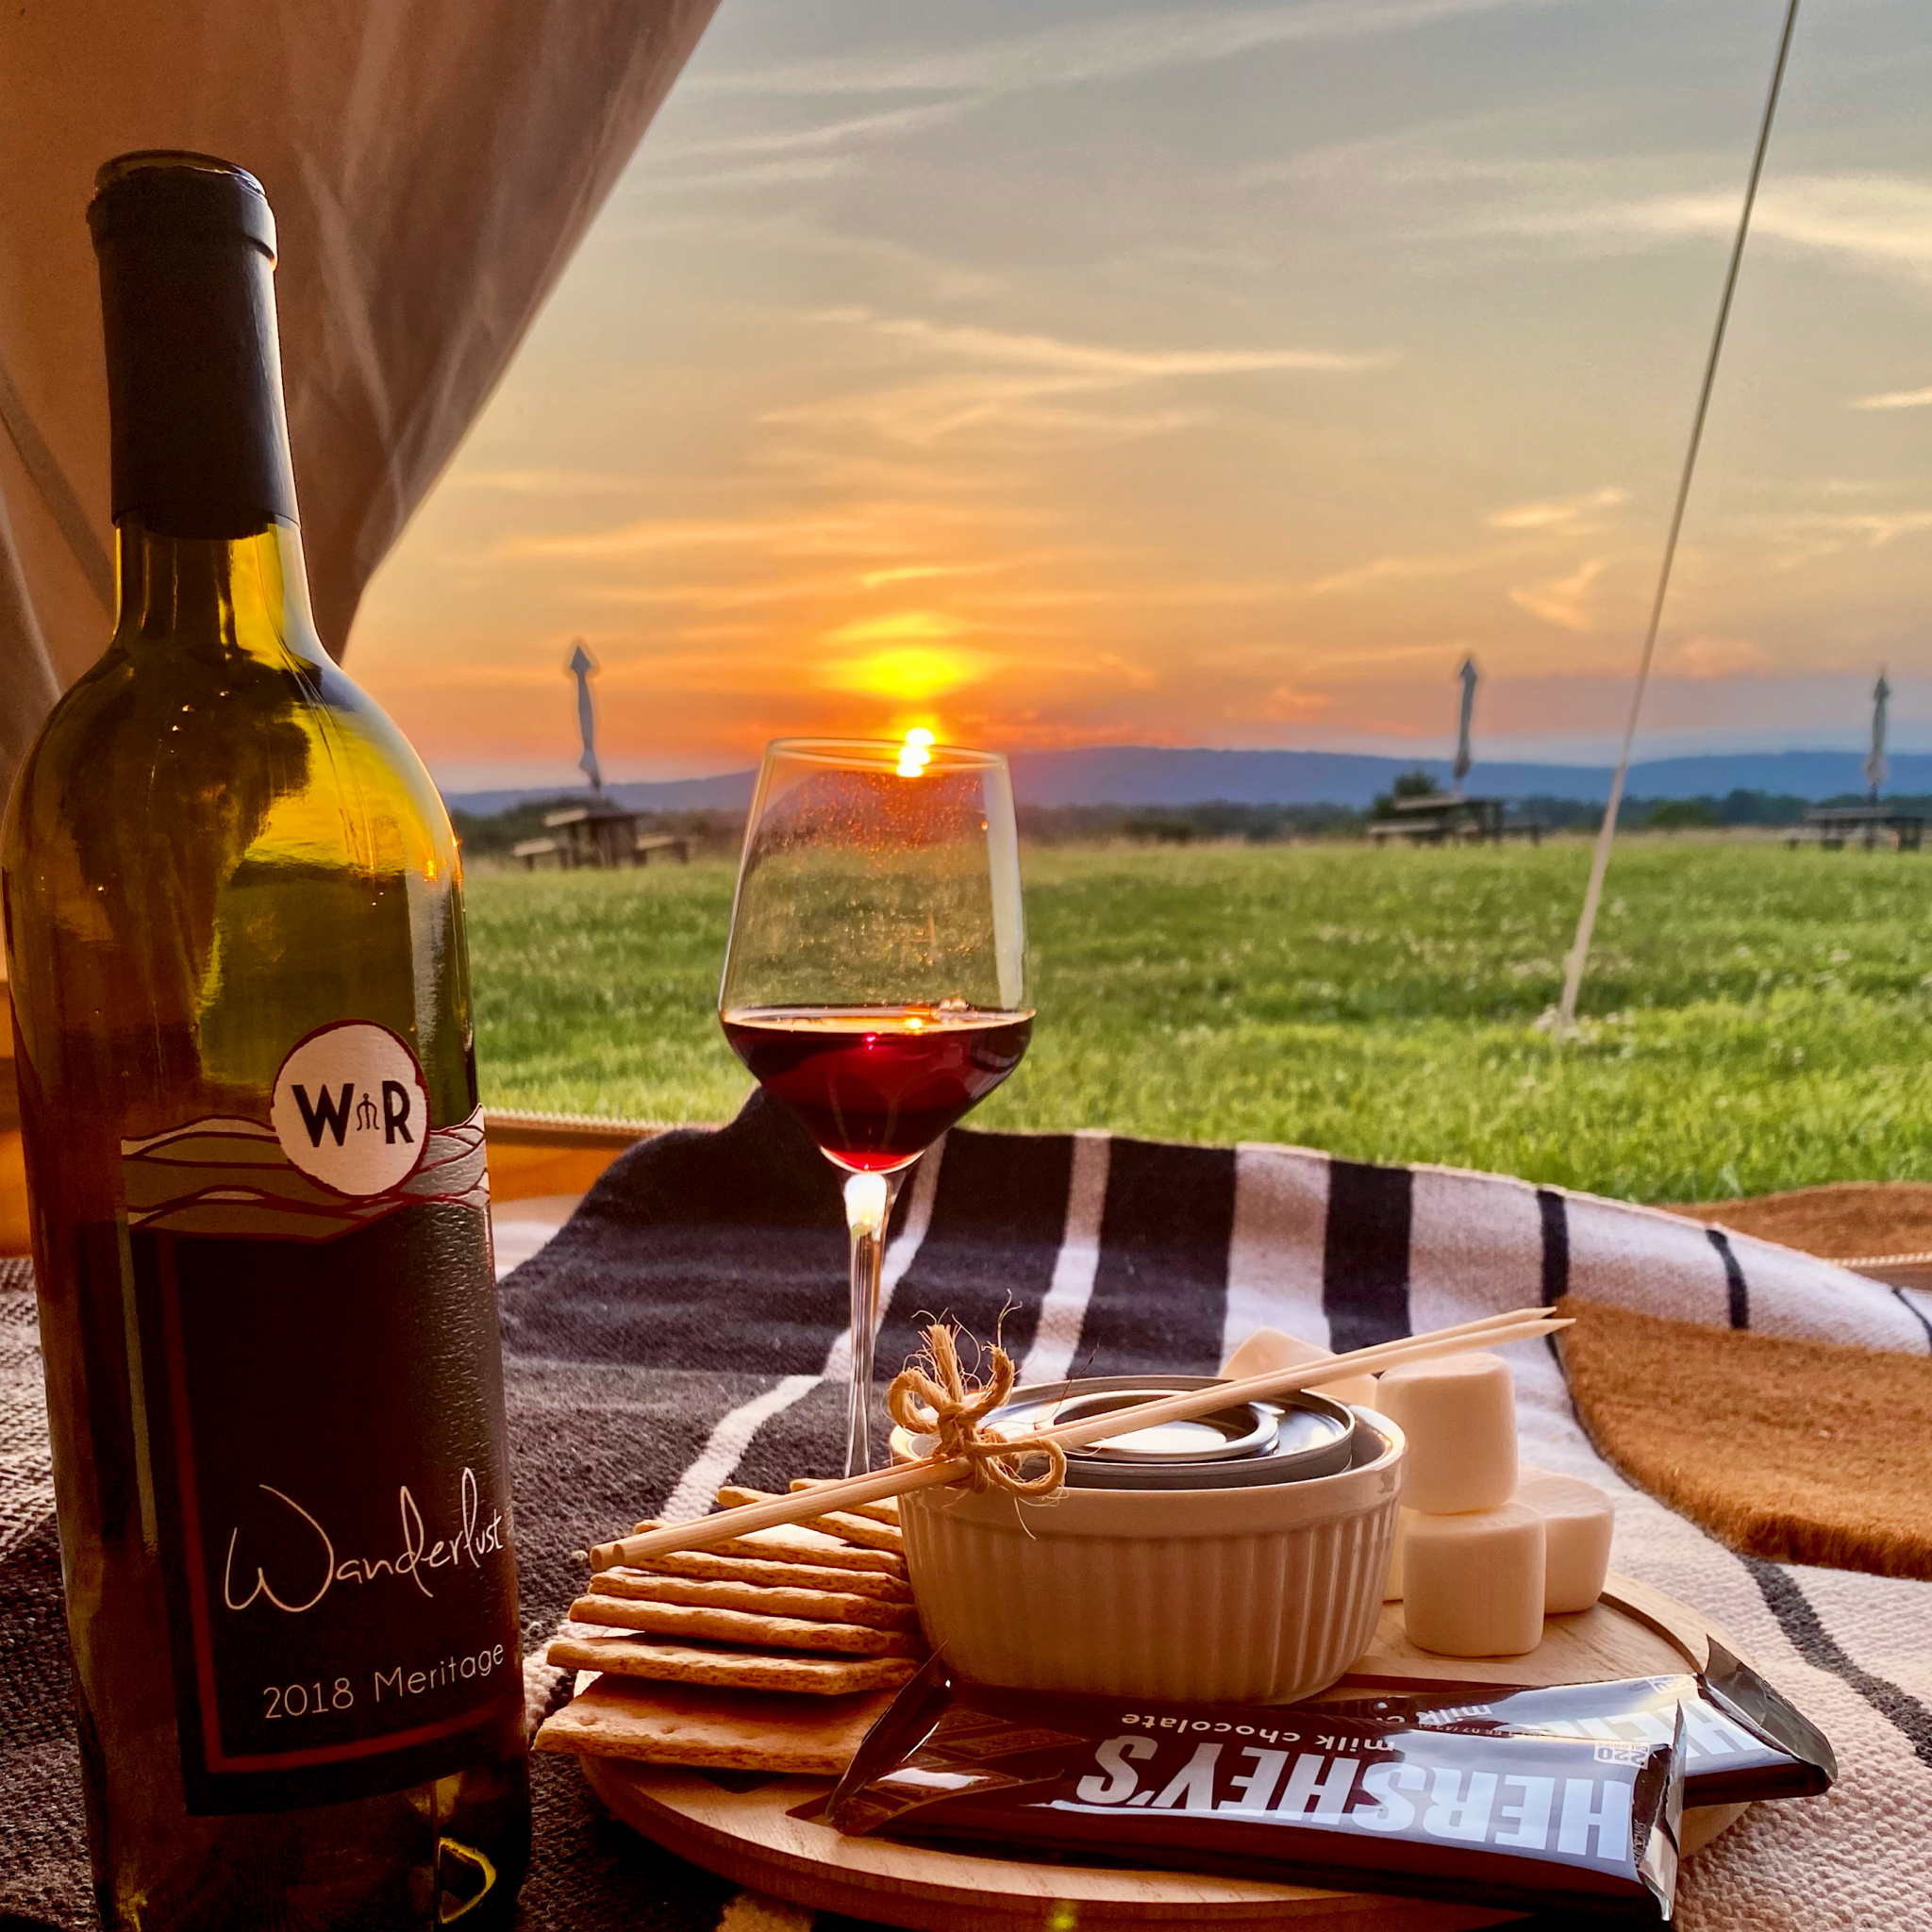 You can see past a wine bottle, glass of wine, and smores kit just inside a tent out to a beautiful sunset over the mountains of Virgnia.